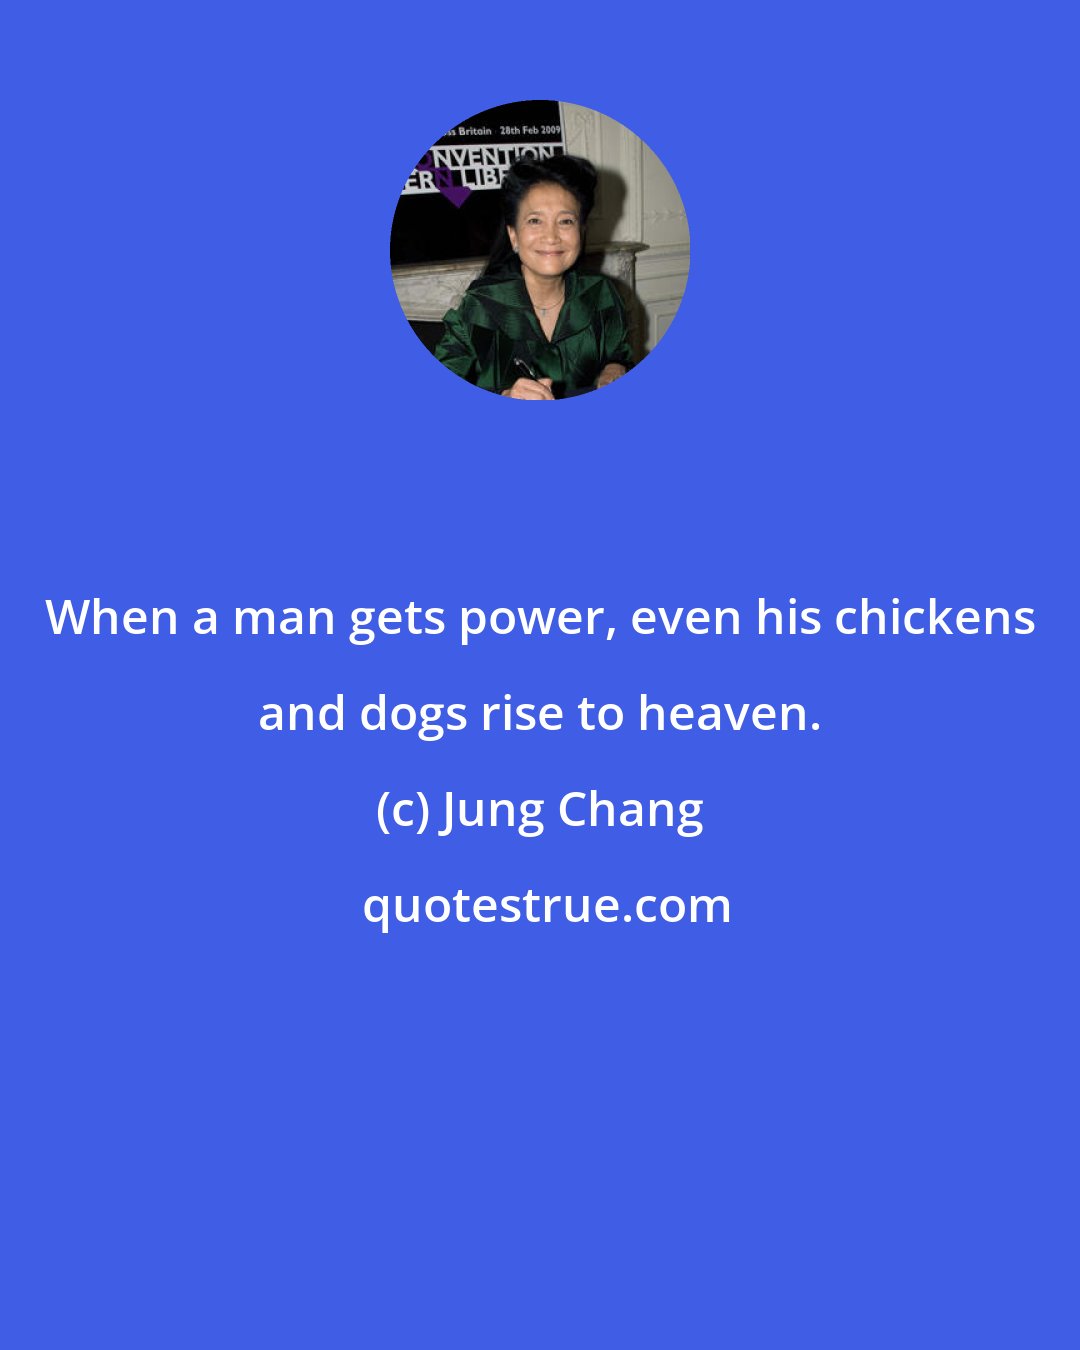 Jung Chang: When a man gets power, even his chickens and dogs rise to heaven.